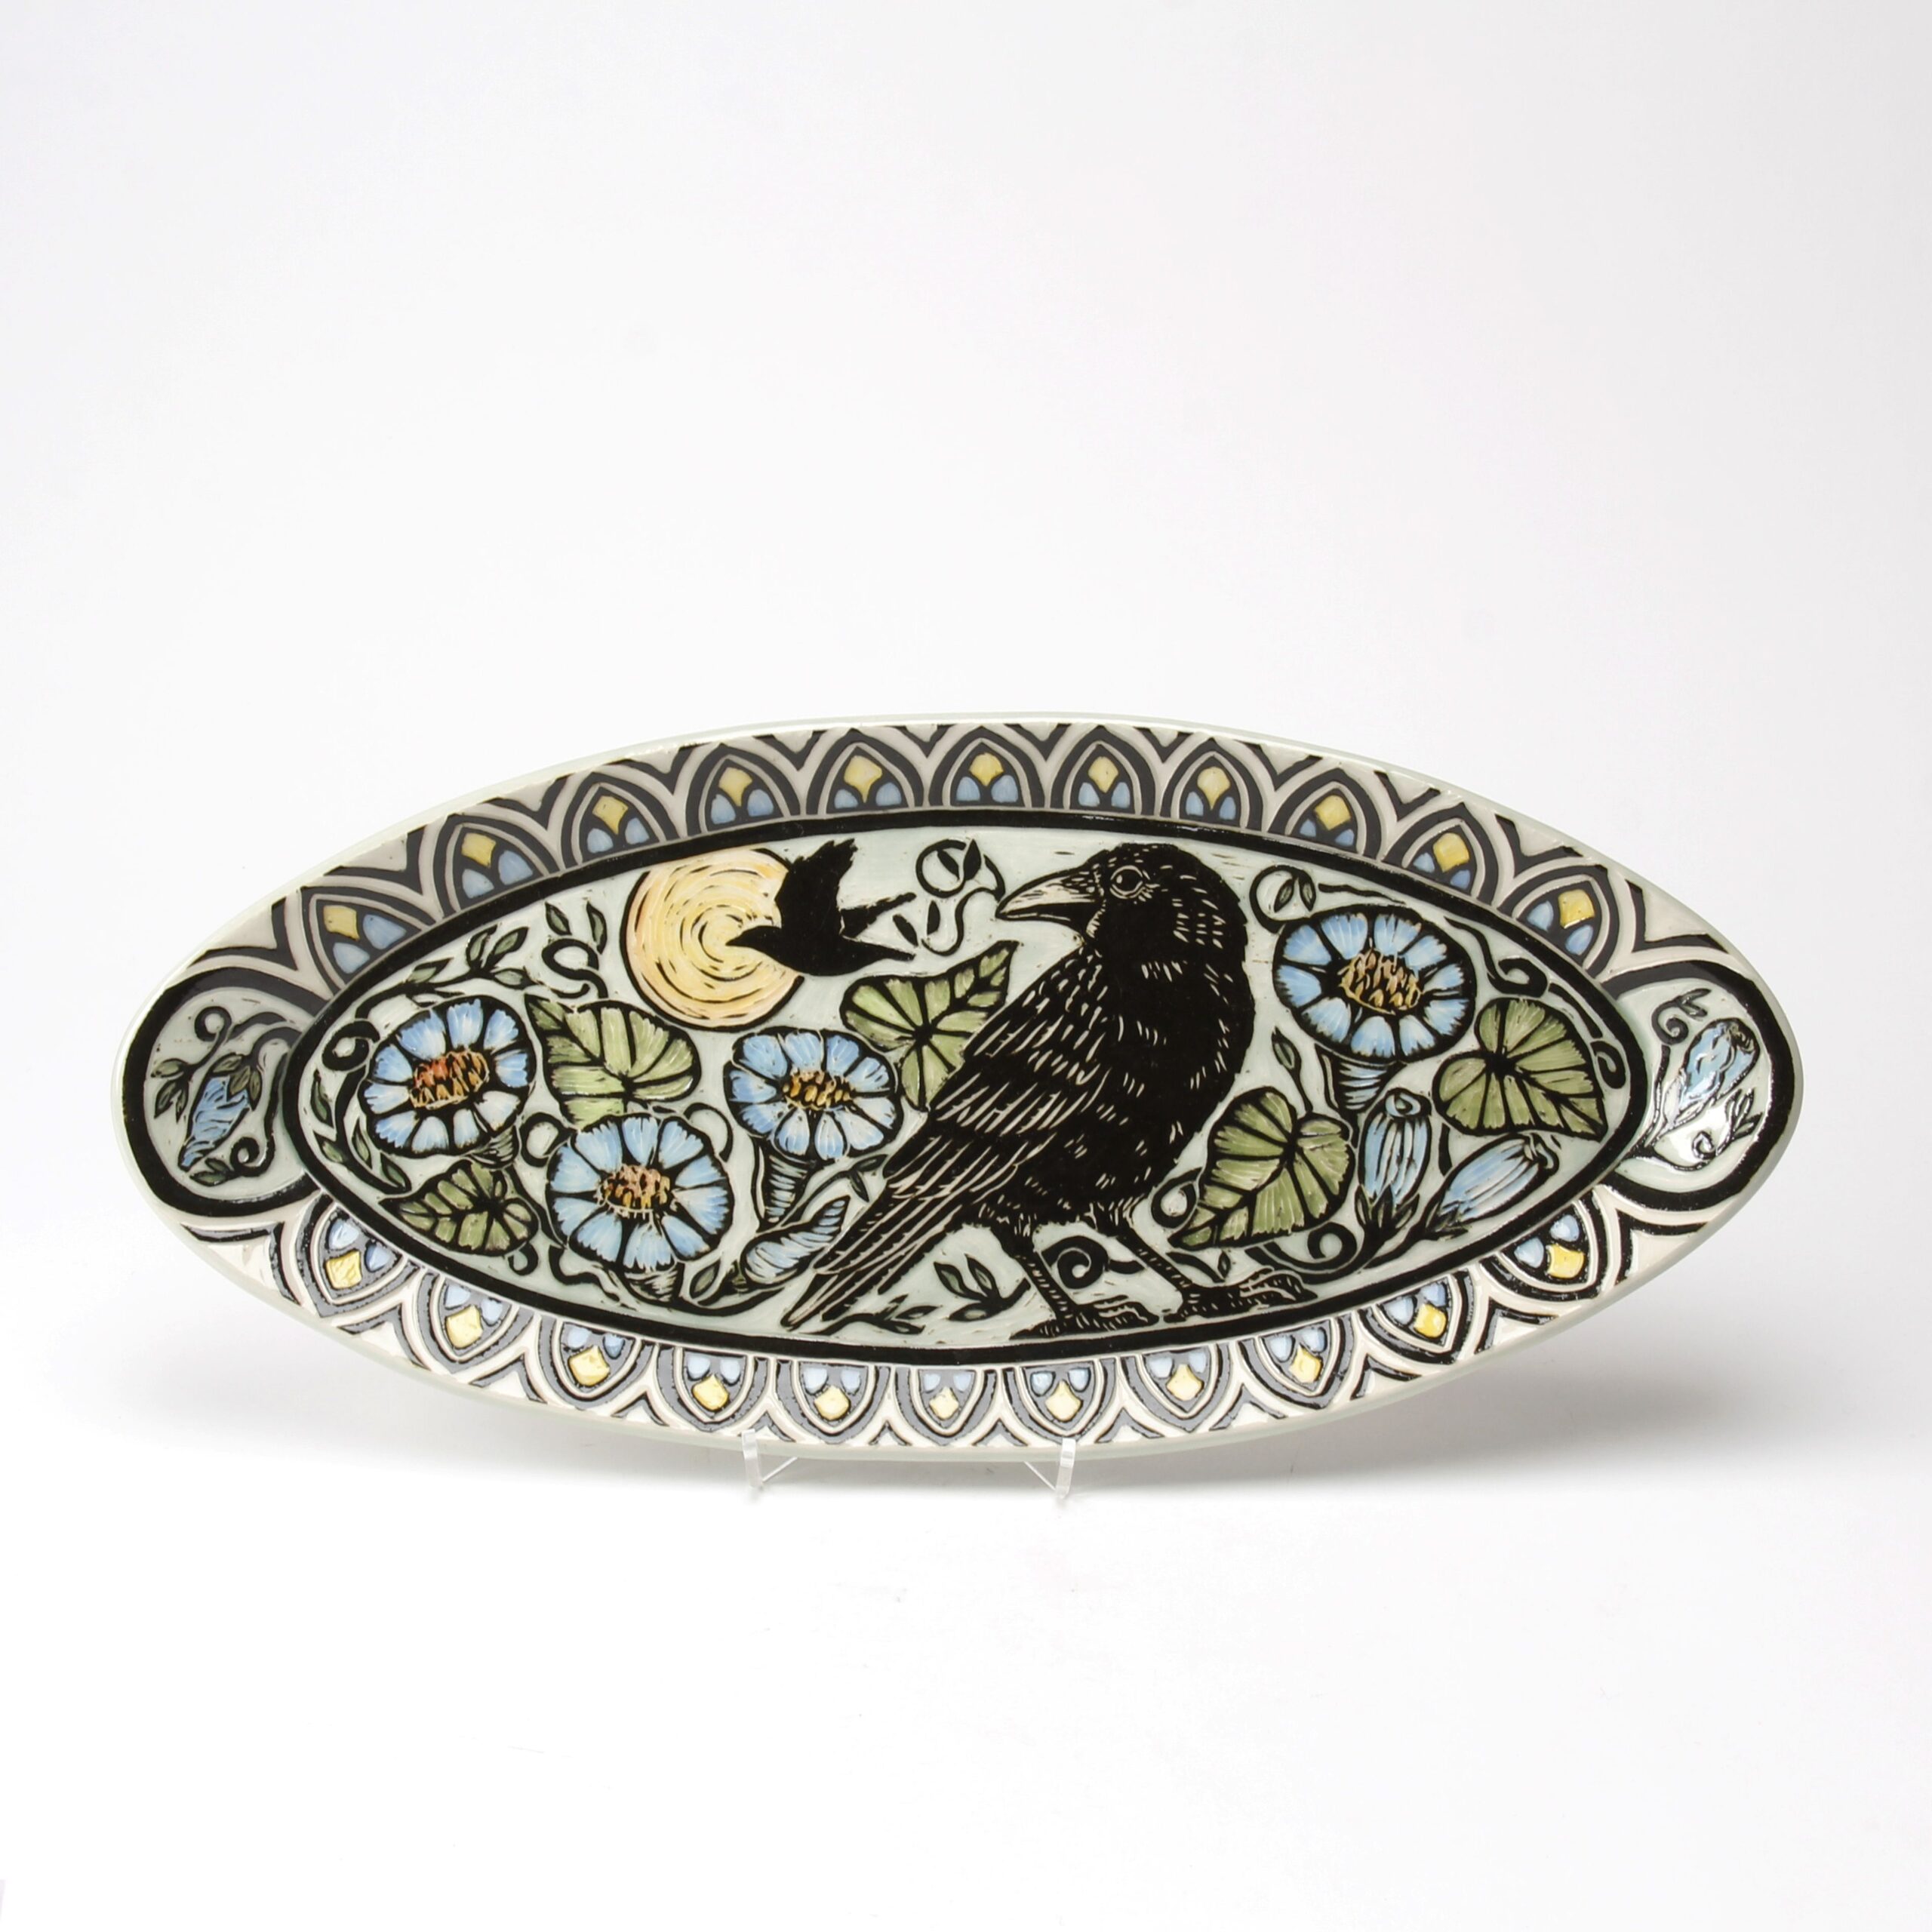 Jocelyn Jenkins: Sgraffito Crow Oval Plate Product Image 1 of 3